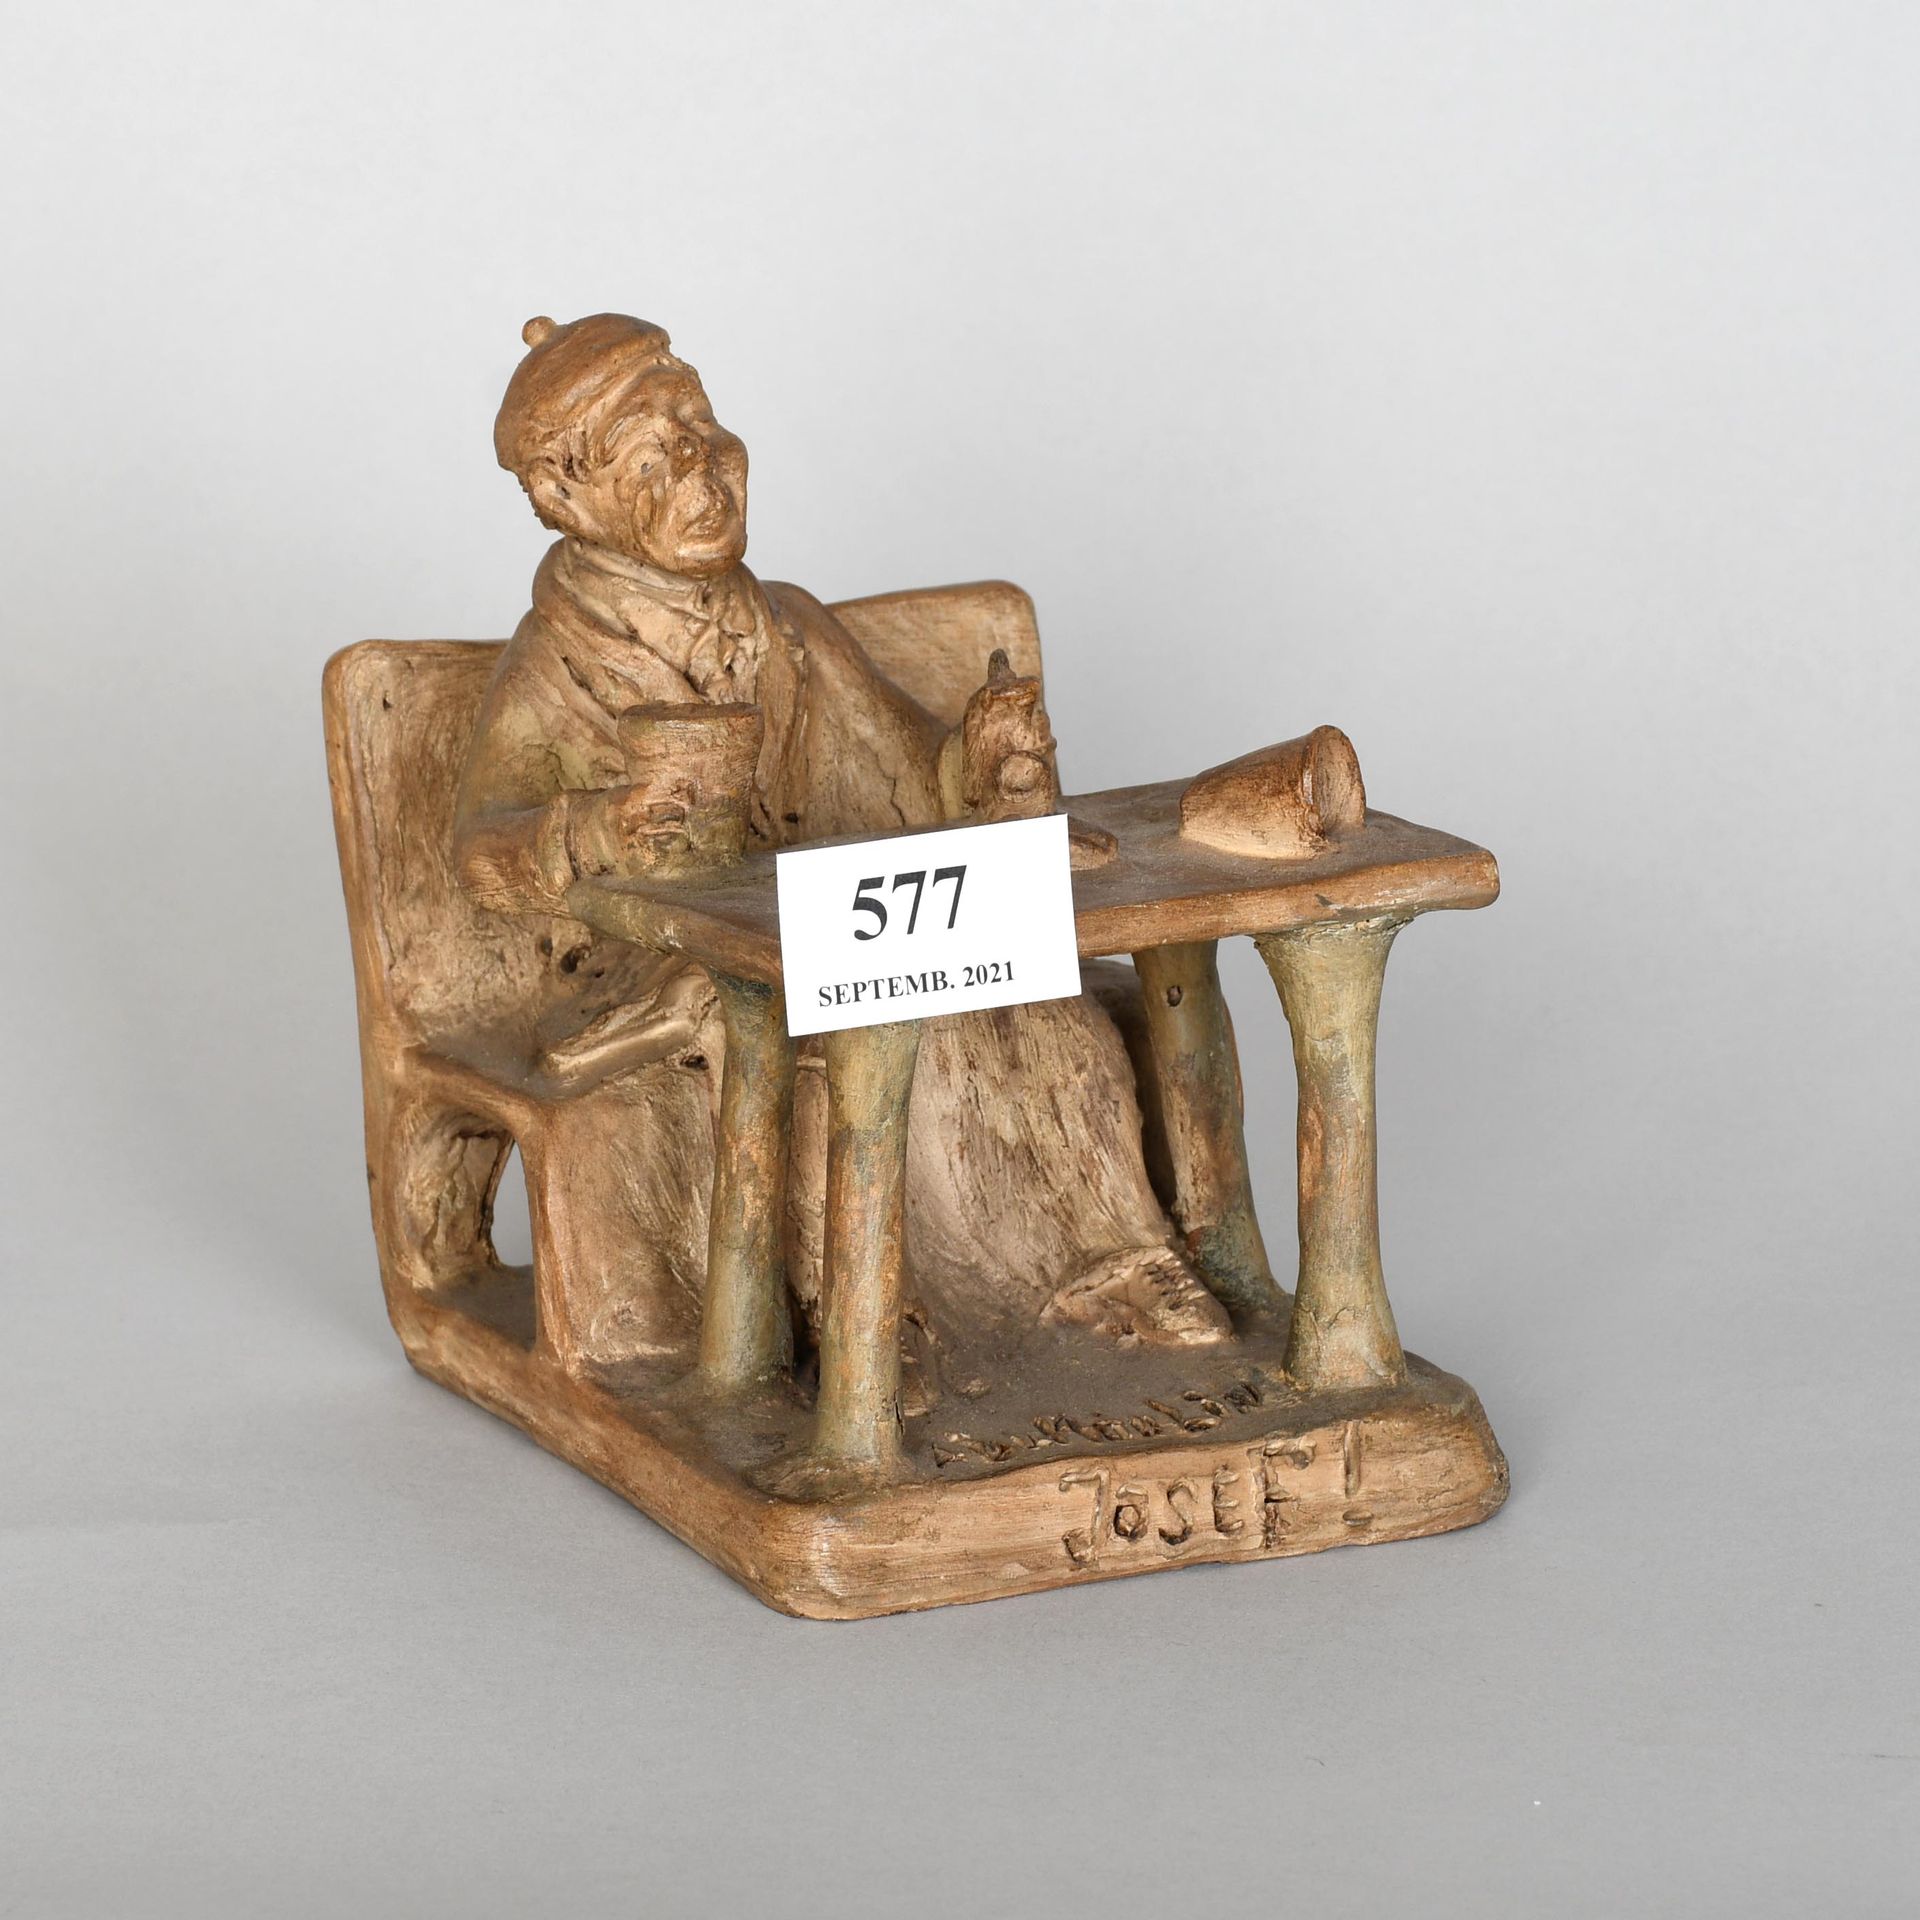 Null A. Dumoulin

Terracotta statue : "Josef". Entitled. Signed. Height : 14 cm.